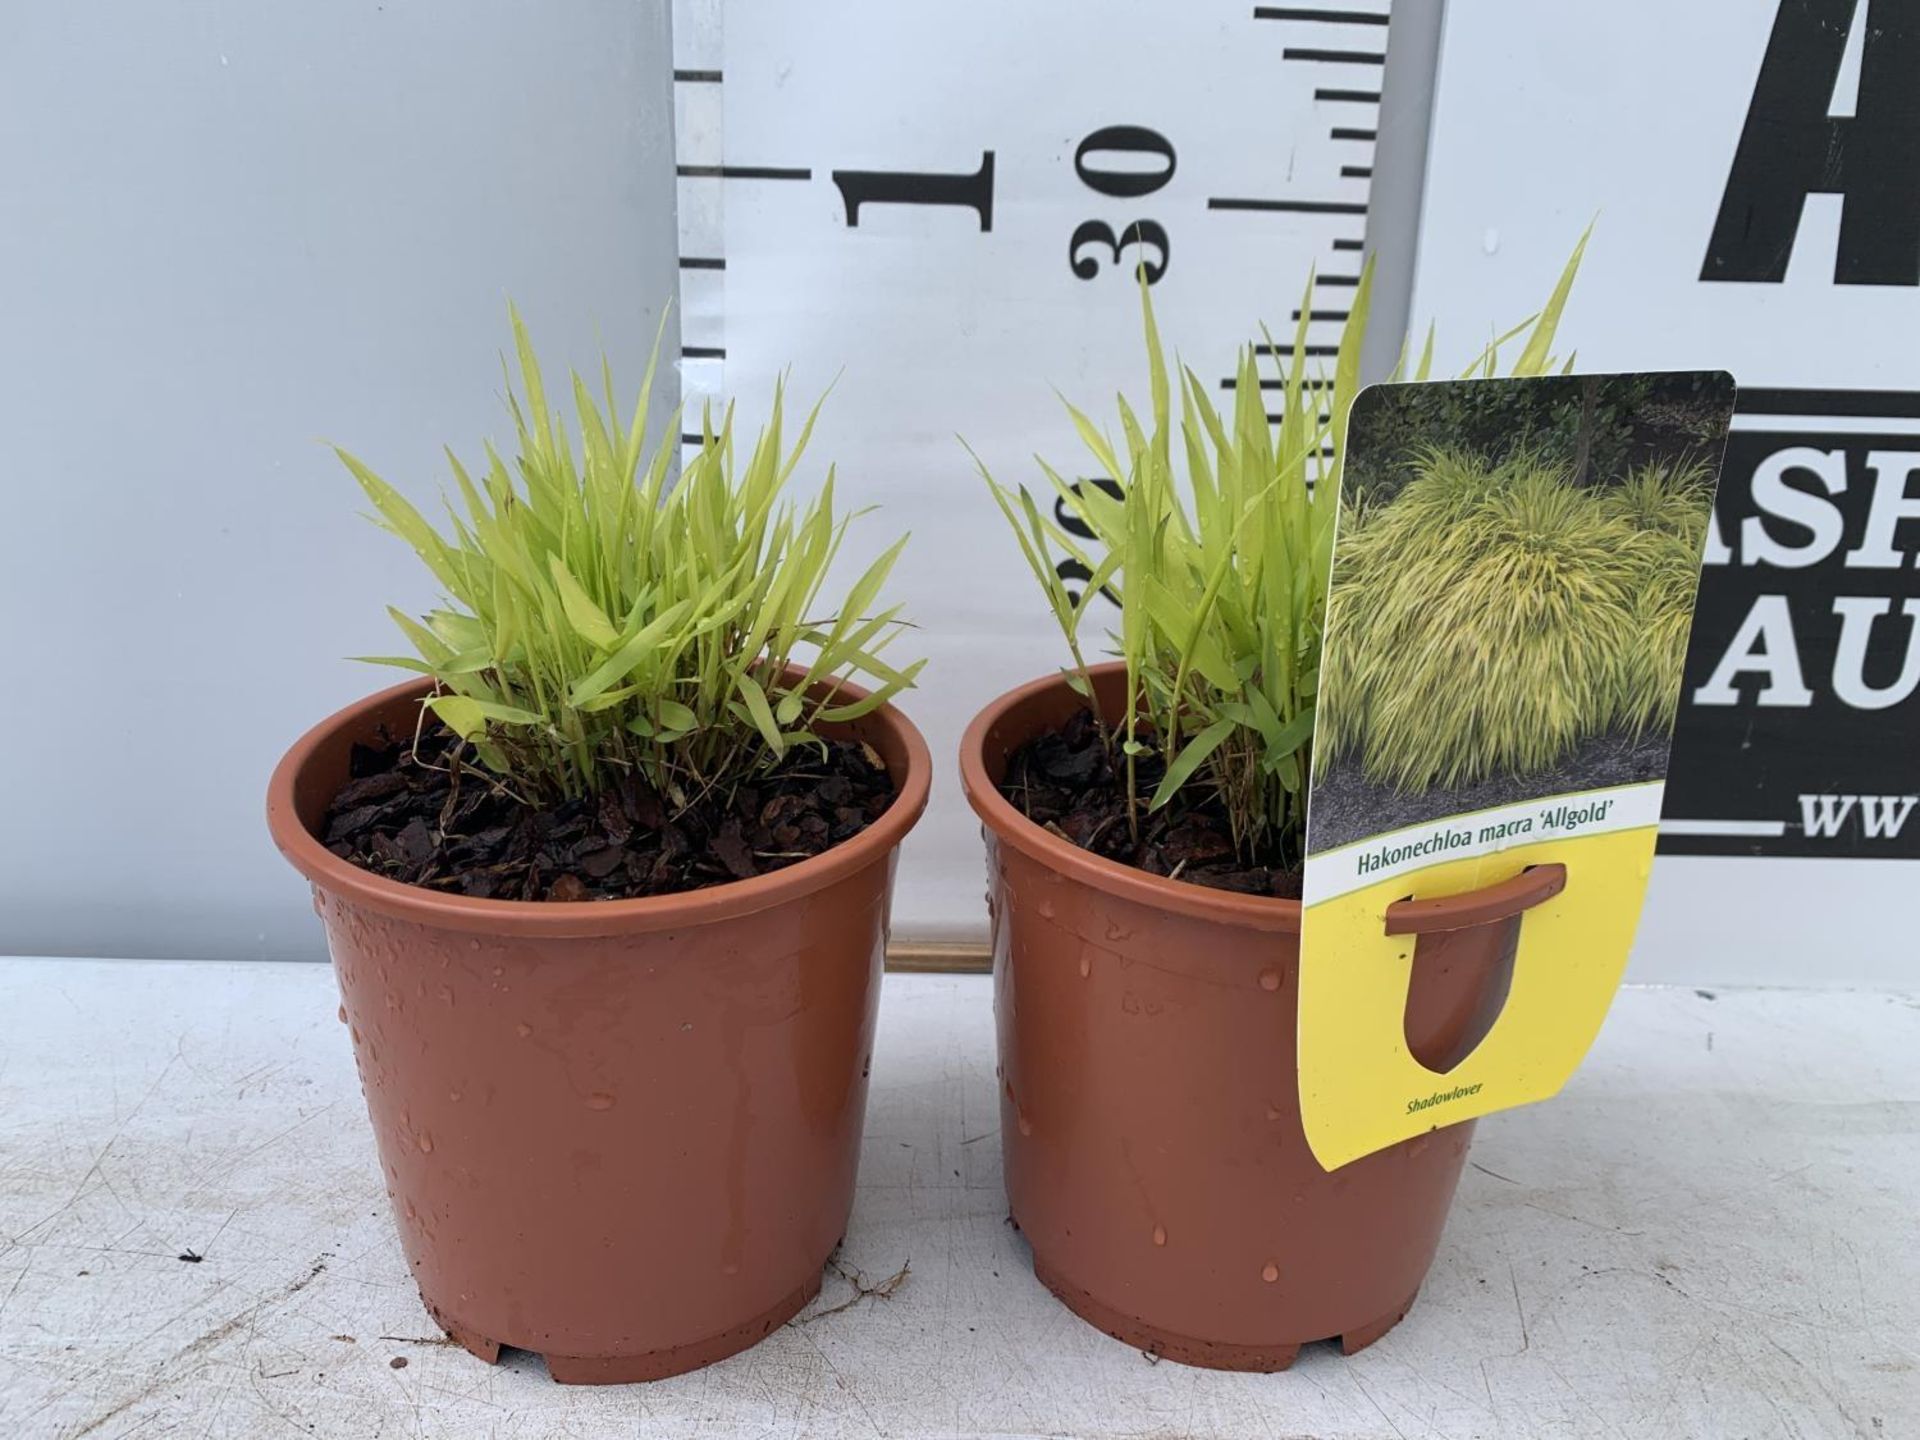 TWO ORNAMENTAL GRASSES HAKONECHLOA MACRA 'ALLGOLD' IN 1 LTR POTS PLUS VAT TO BE SOLD FOR THE TWO - Image 2 of 8